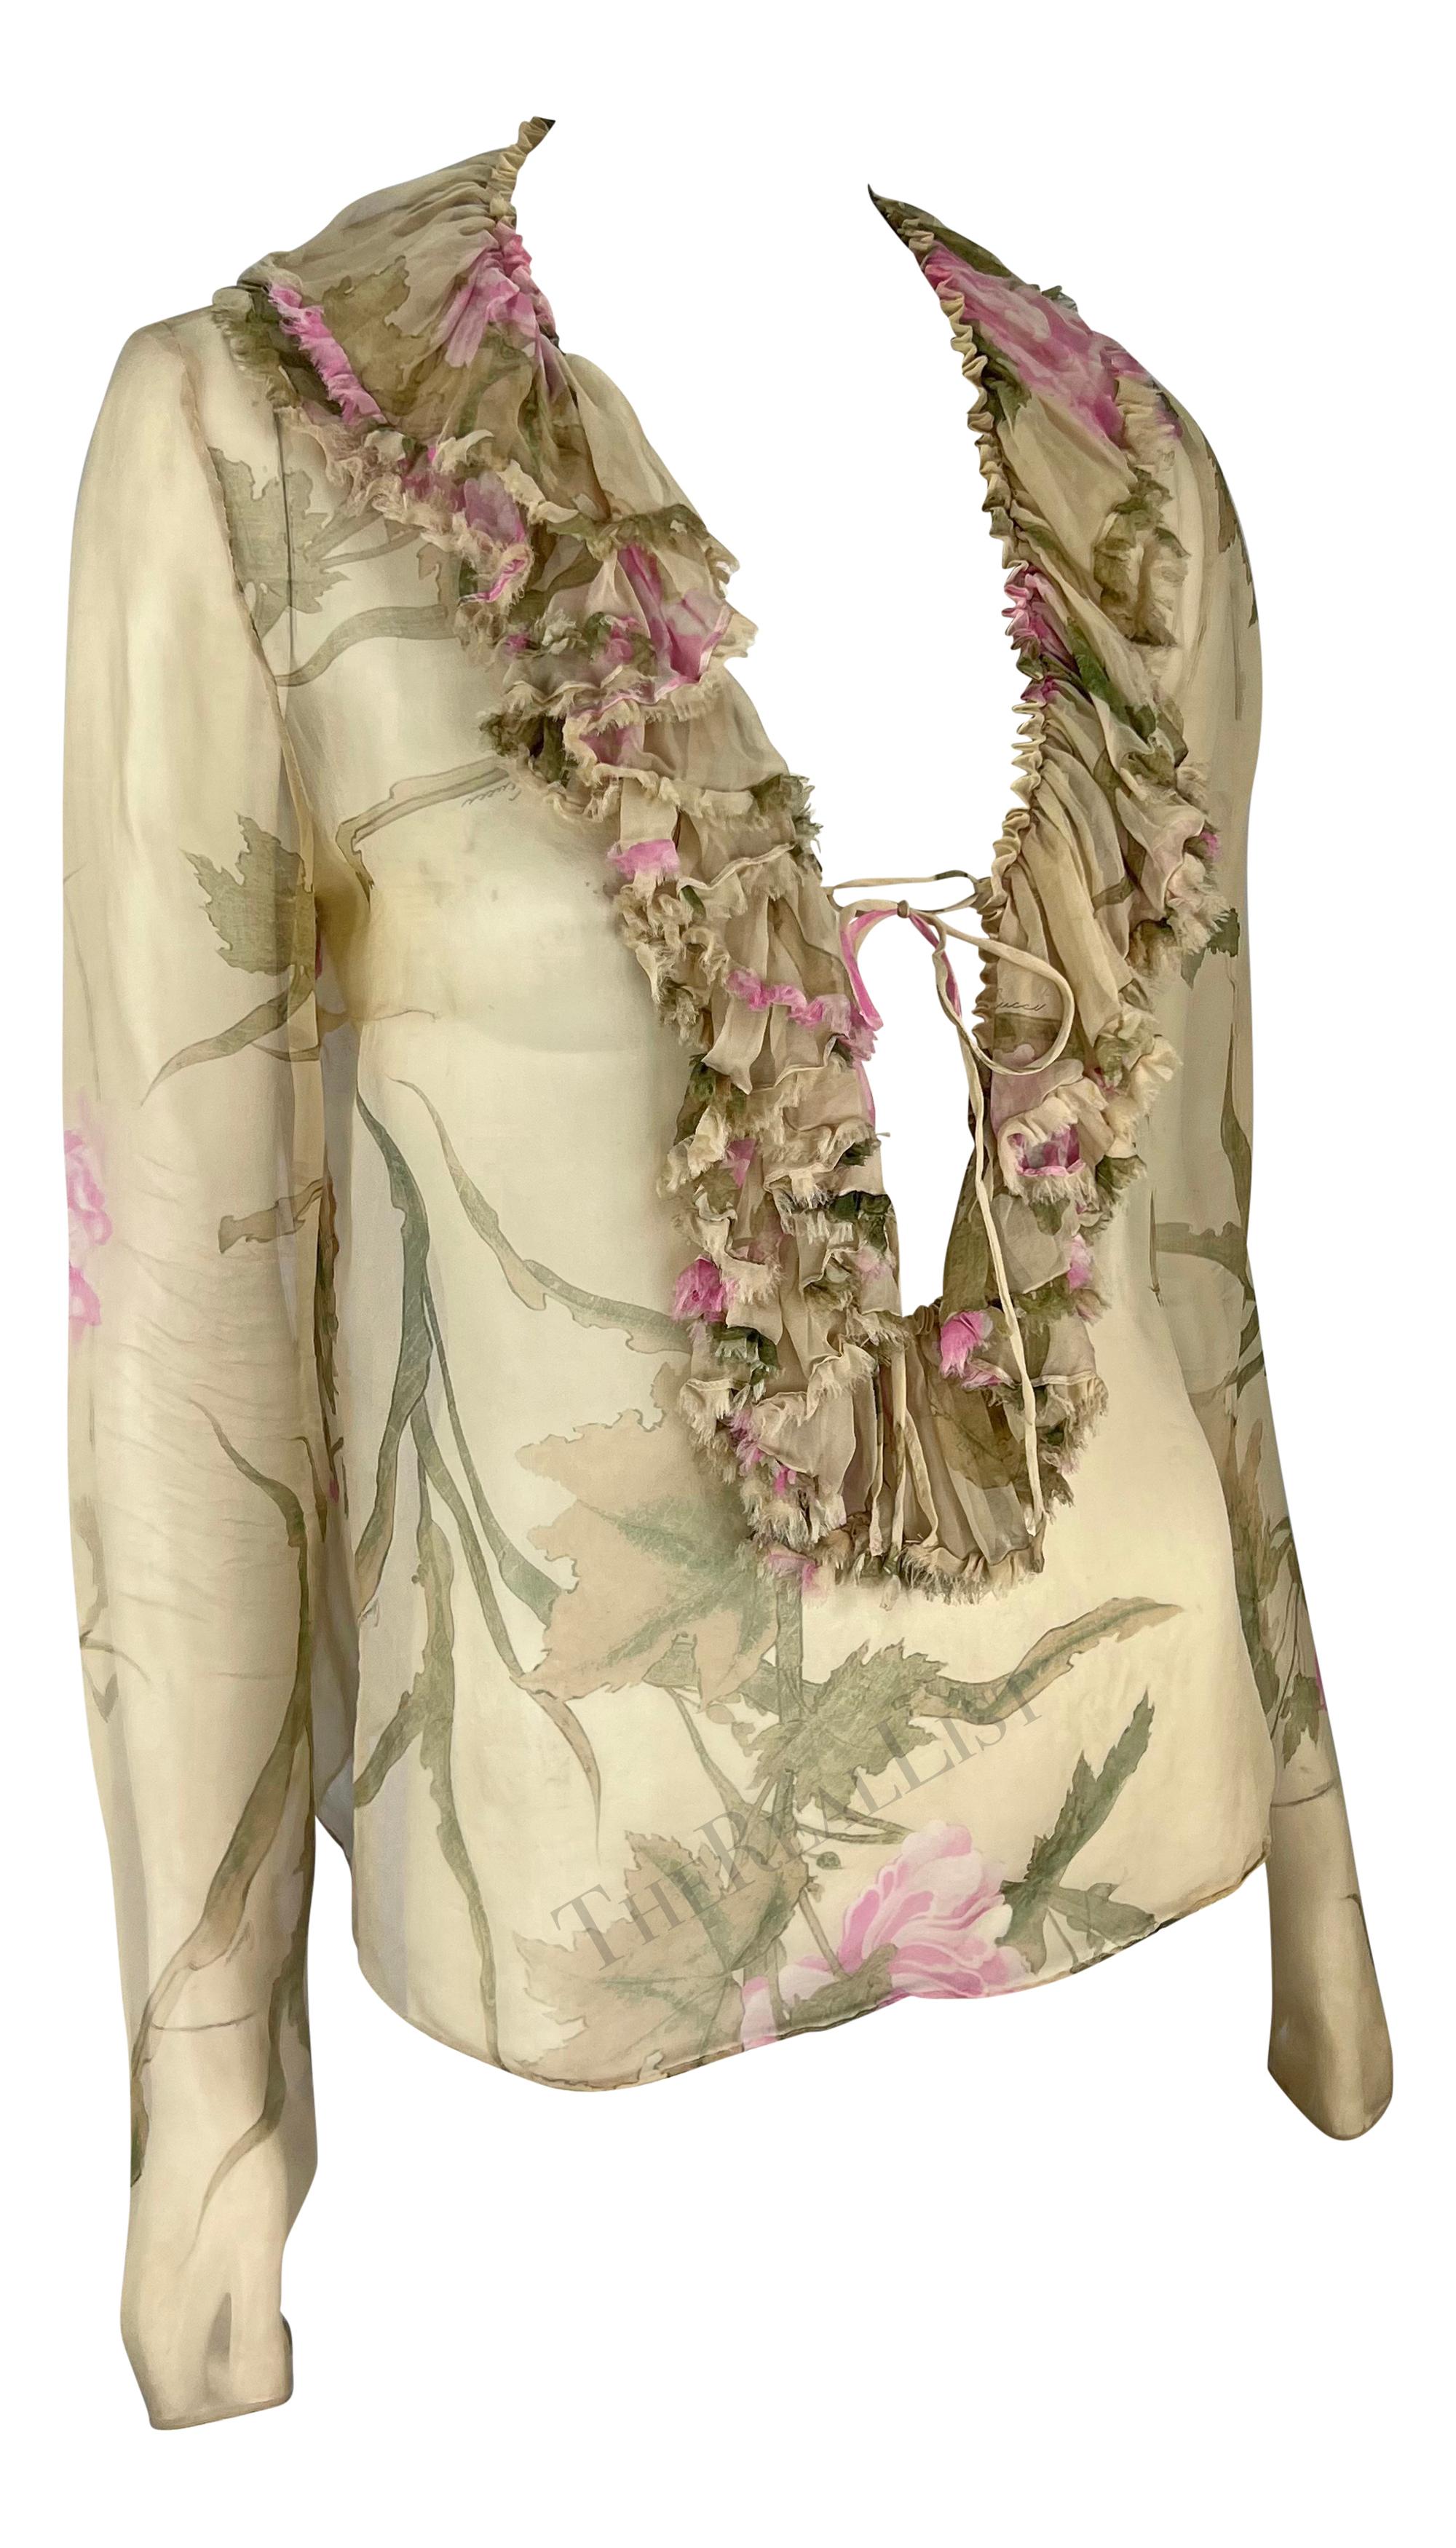 S/S 2003 Gucci by Tom Ford Tan Sheer Floral Ruffle Plunging Top For Sale 4